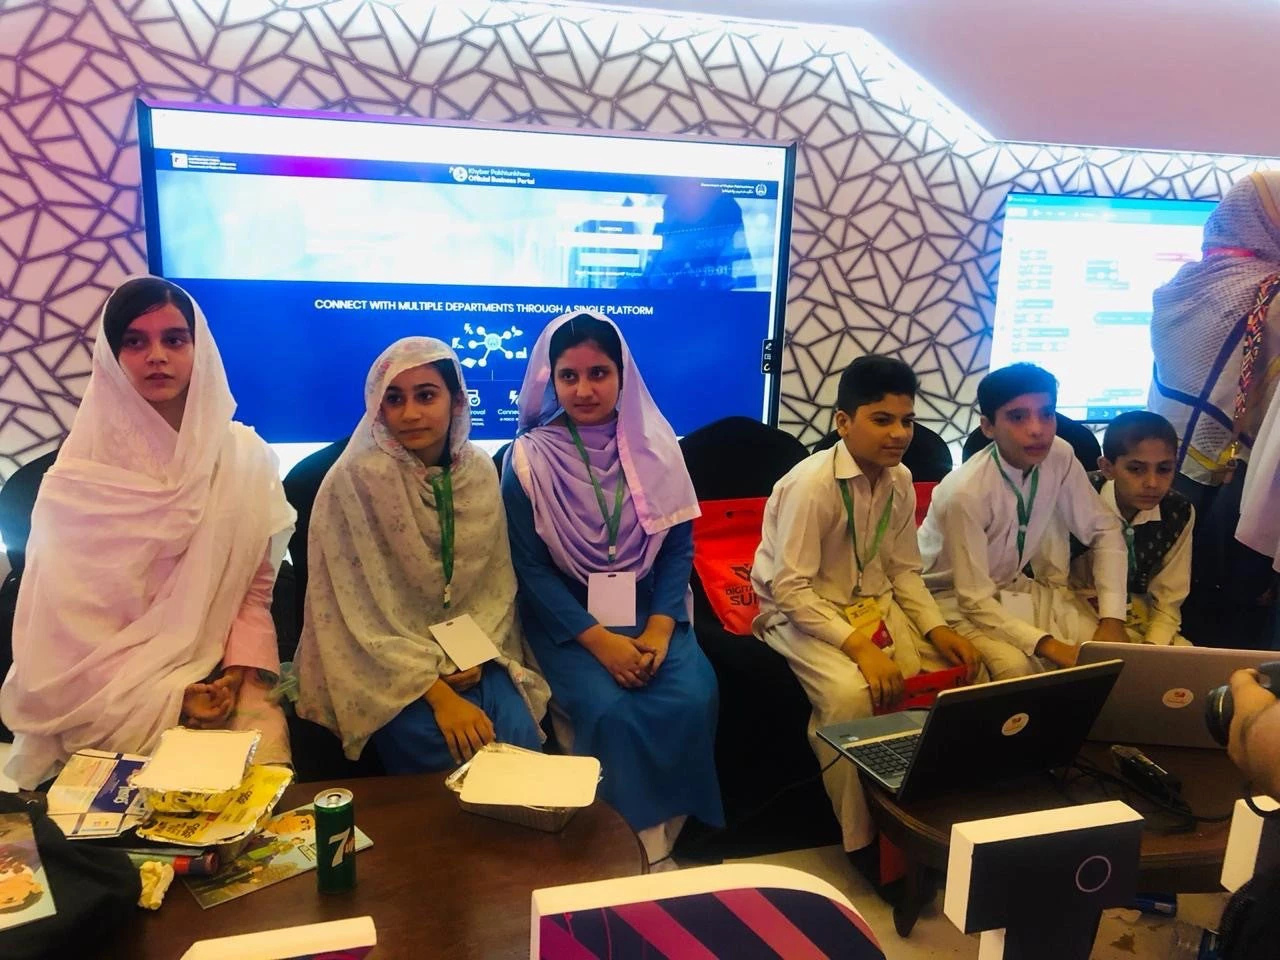 Young people turned up in large numbers at the 2019 Digital Youth Summit in Peshawar, Pakistan. 